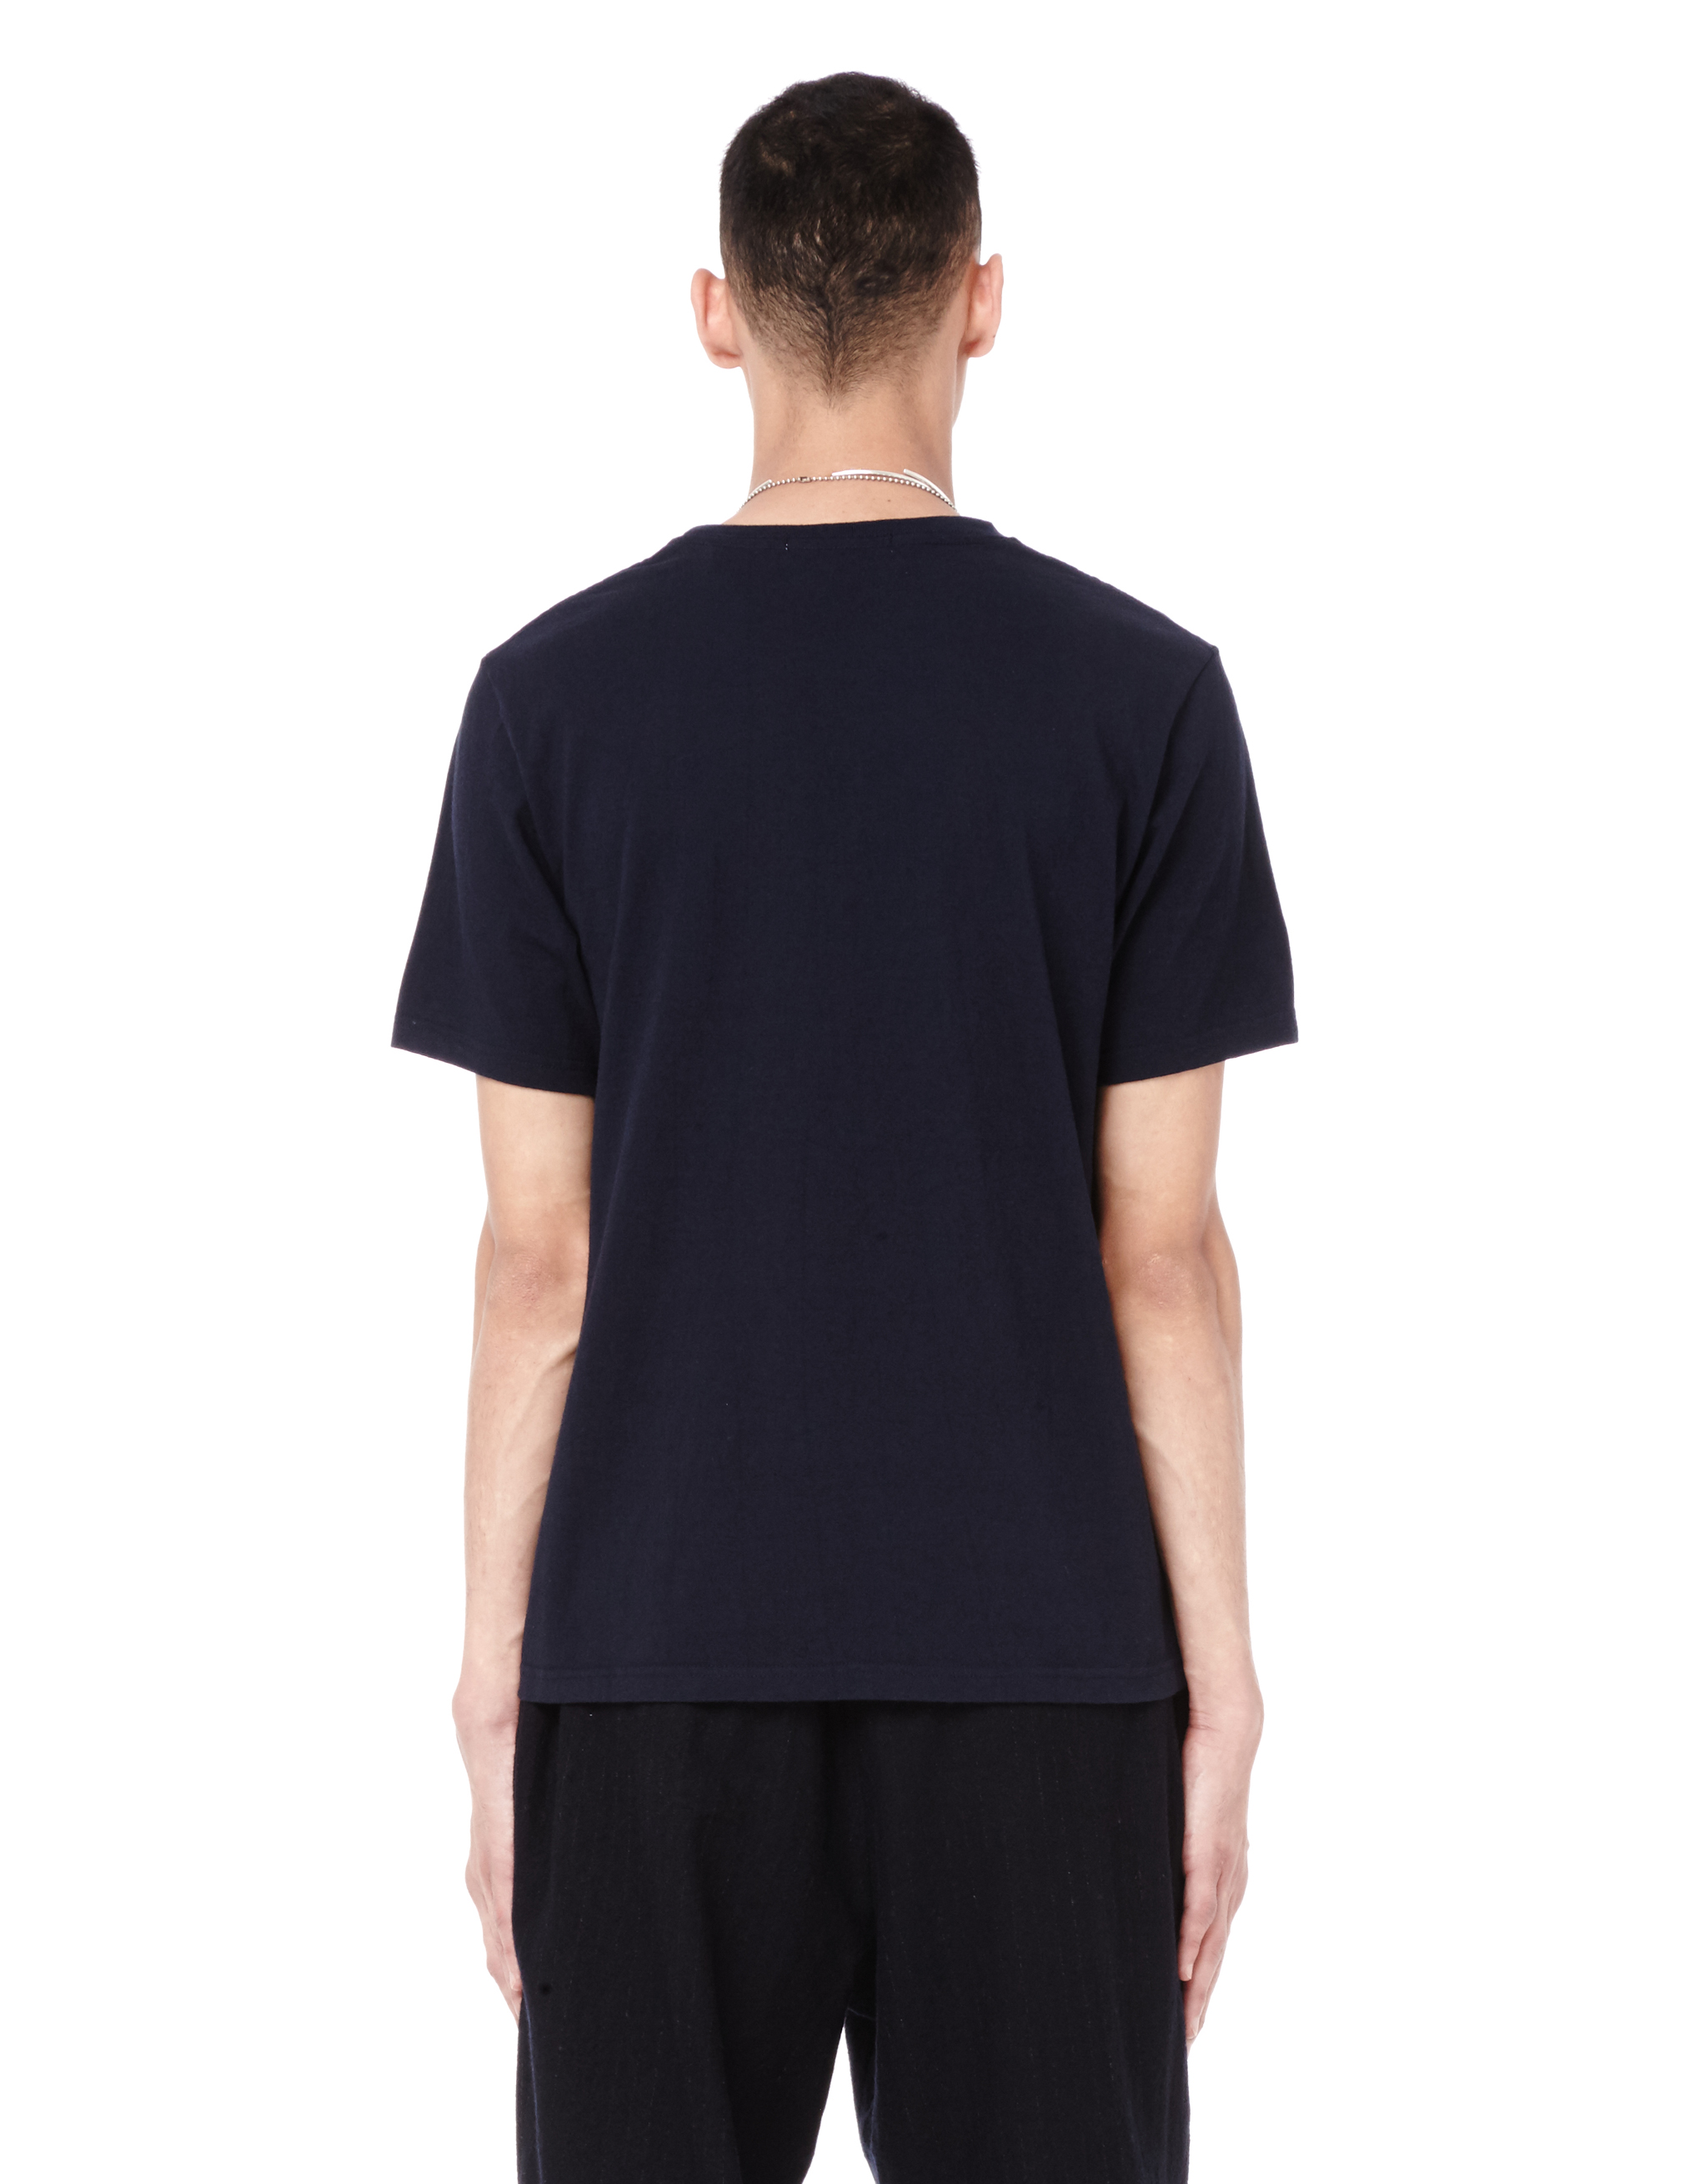 Cotton t-shirt by Undercover — SVMoscow